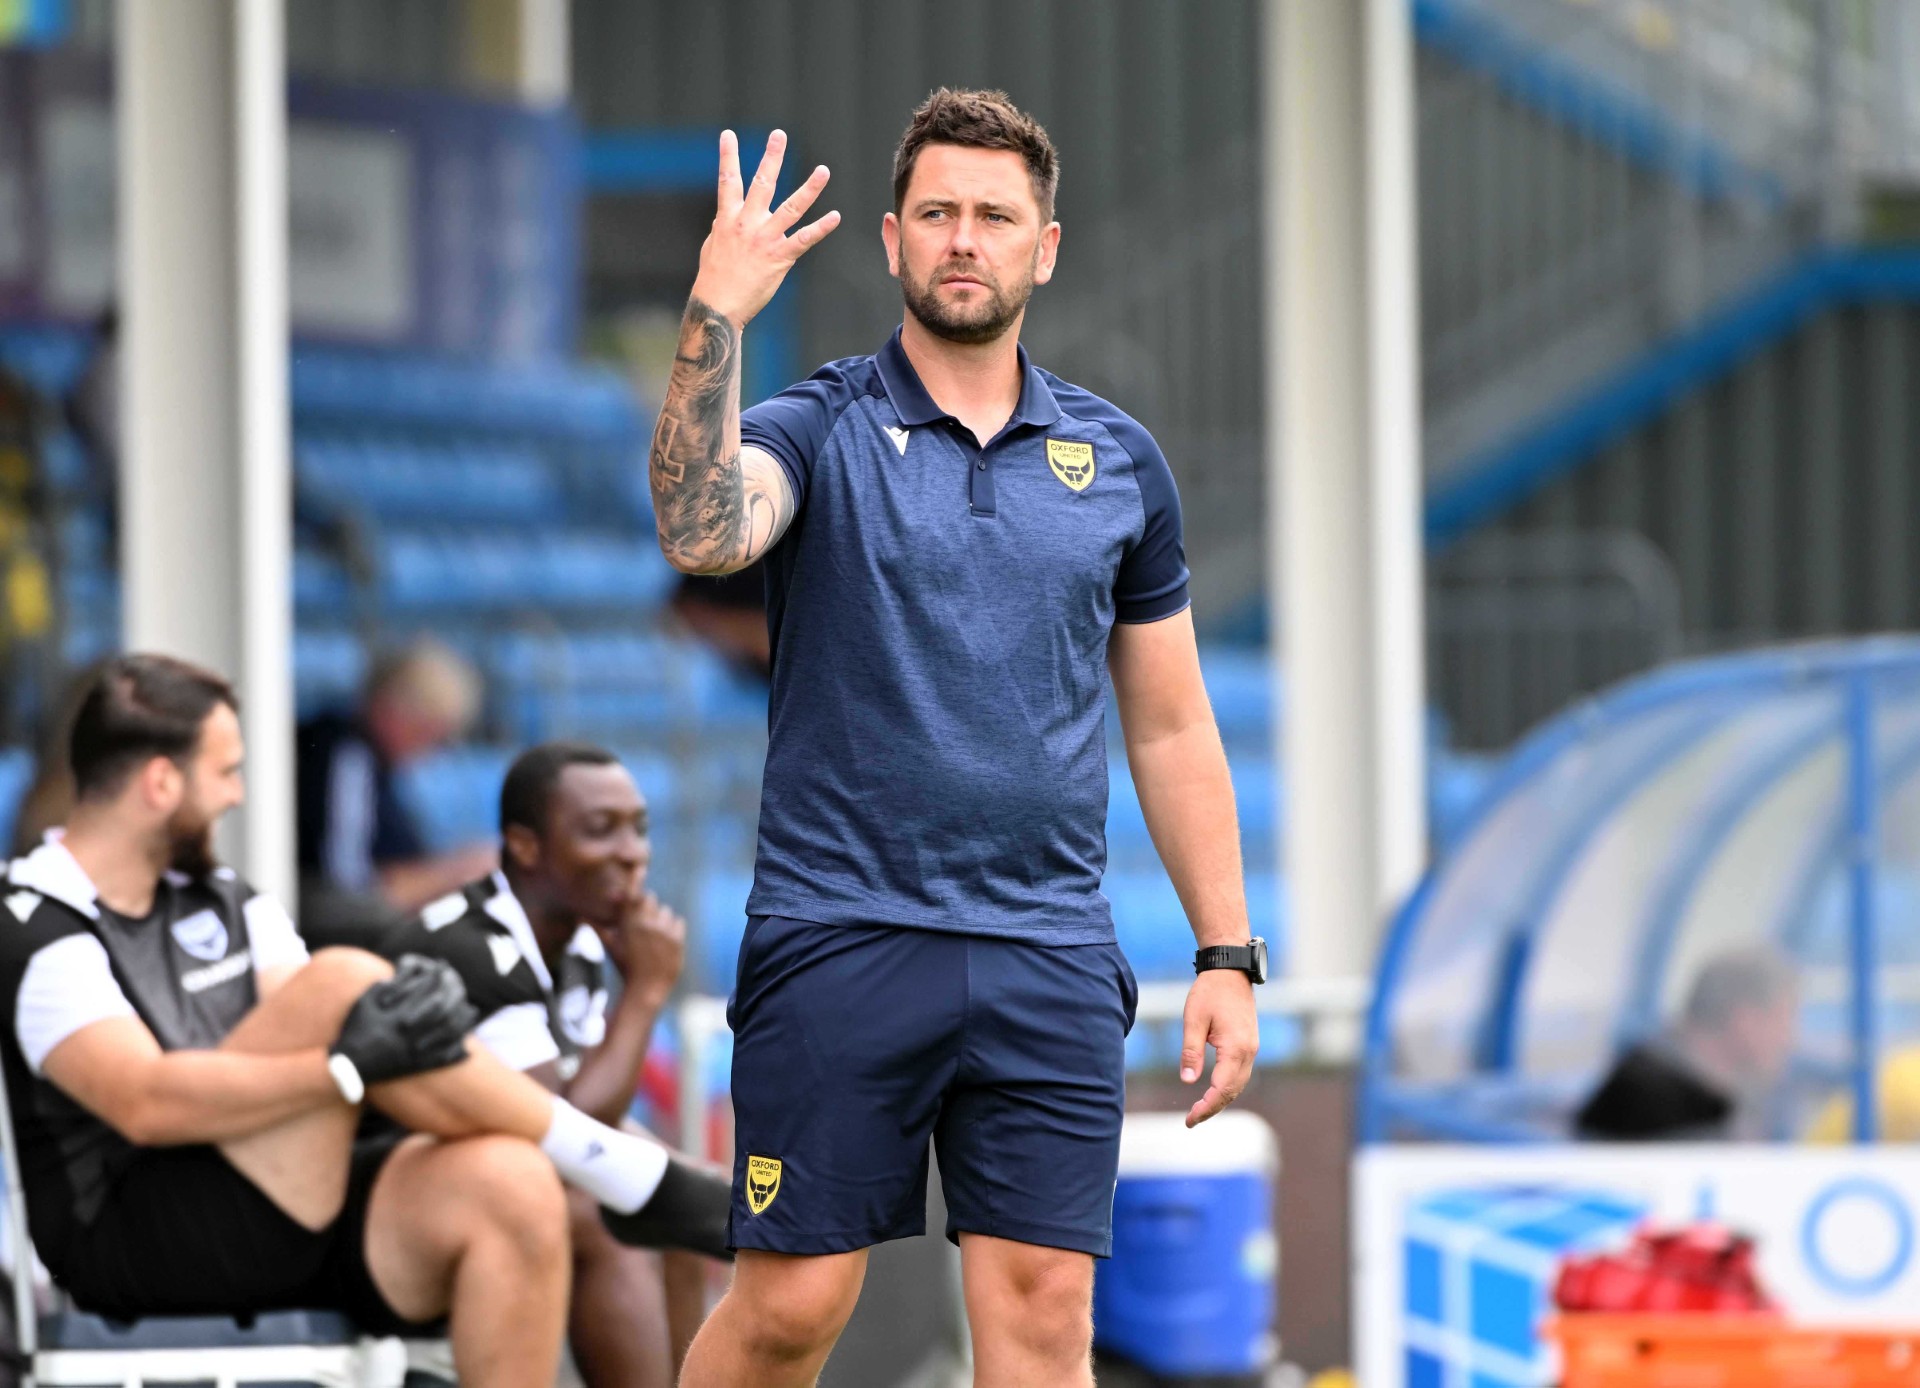 Oxford United beat Oxford City and Solihull Moors: Talking points